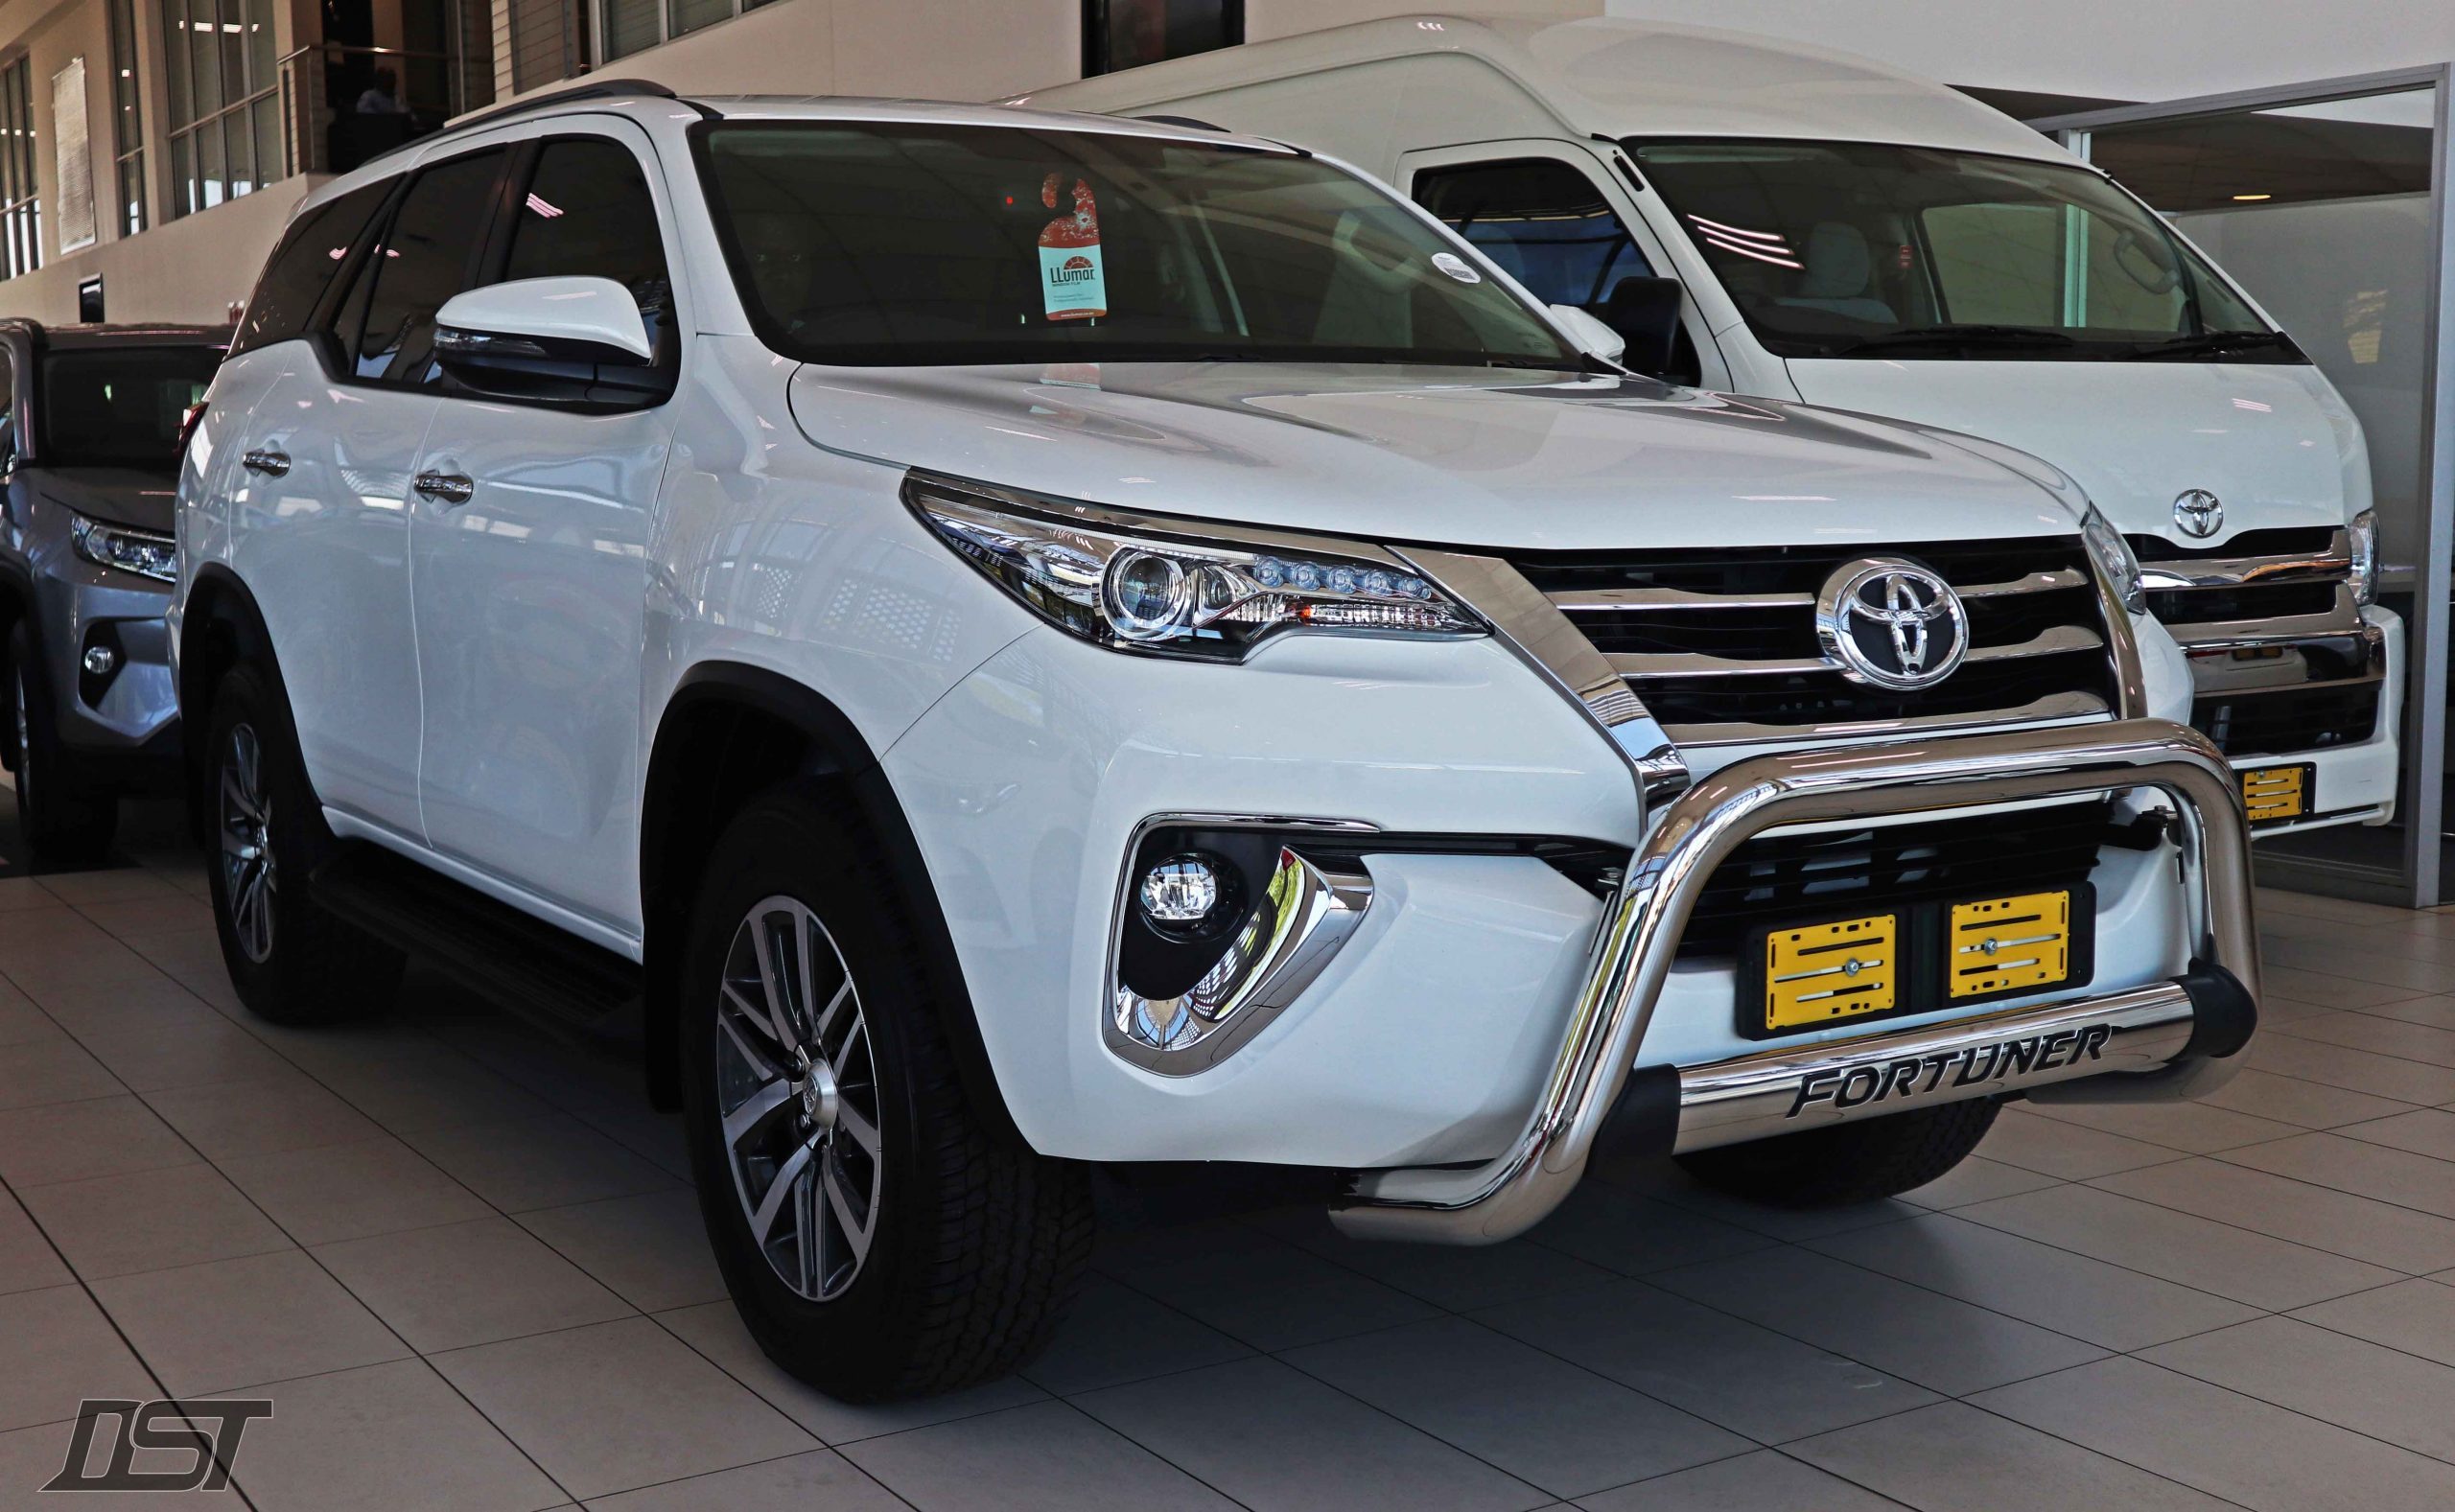 Toyota Fortuner 2.8 GD6 Fierce Edition front view